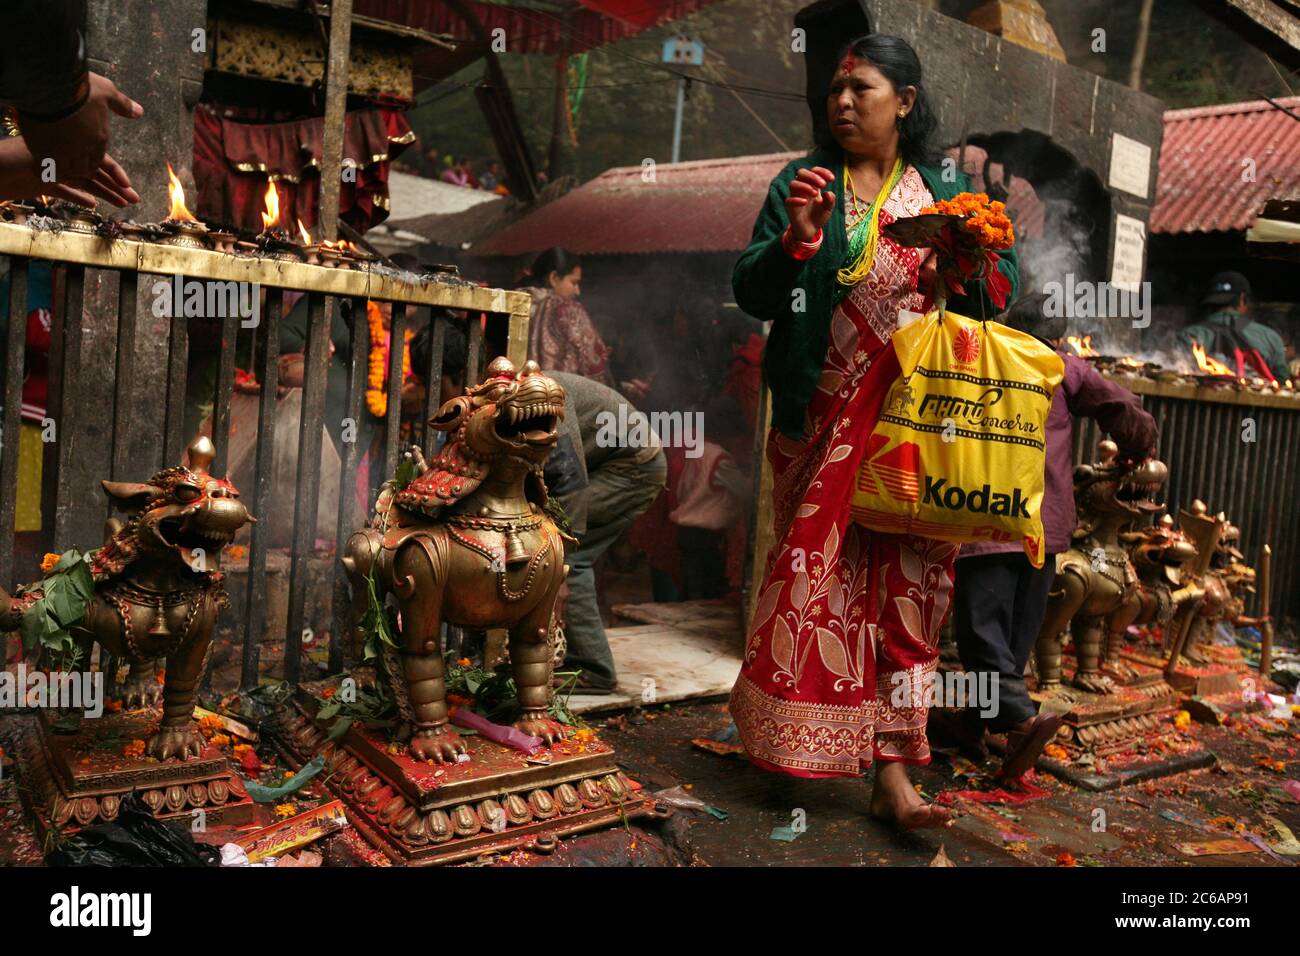 Nepalese woman leaves the main sanctuary in the Dakshinkali Temple near Kathmandu, Nepal. One of the major Hindu temples in Nepal dedicated to the goddess Kali is known for its animal sacrifices which take place in the main sanctuary. Stock Photo